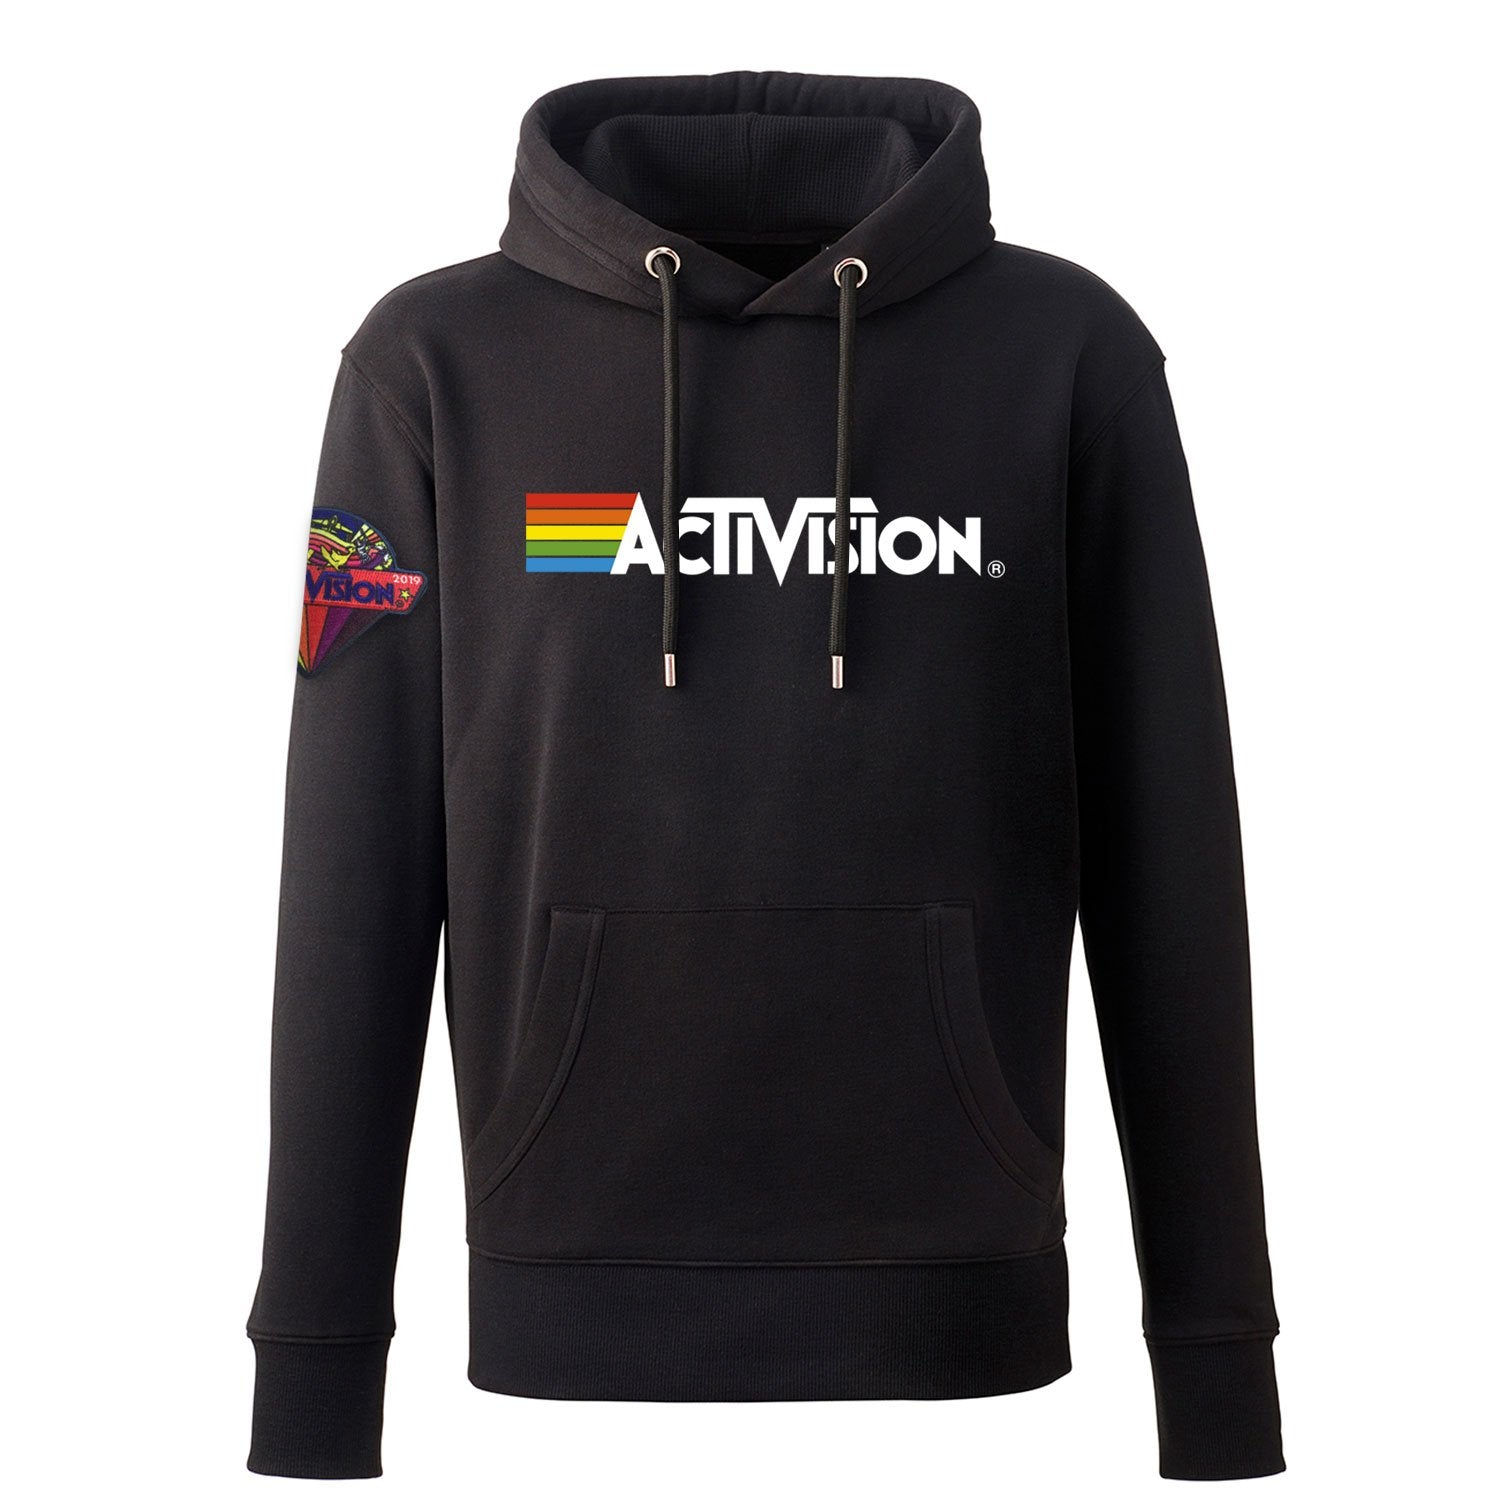 Activision Patch Logo Men's Hoody, Black Pullover in Unisex Fit with Kangaroo Pocket